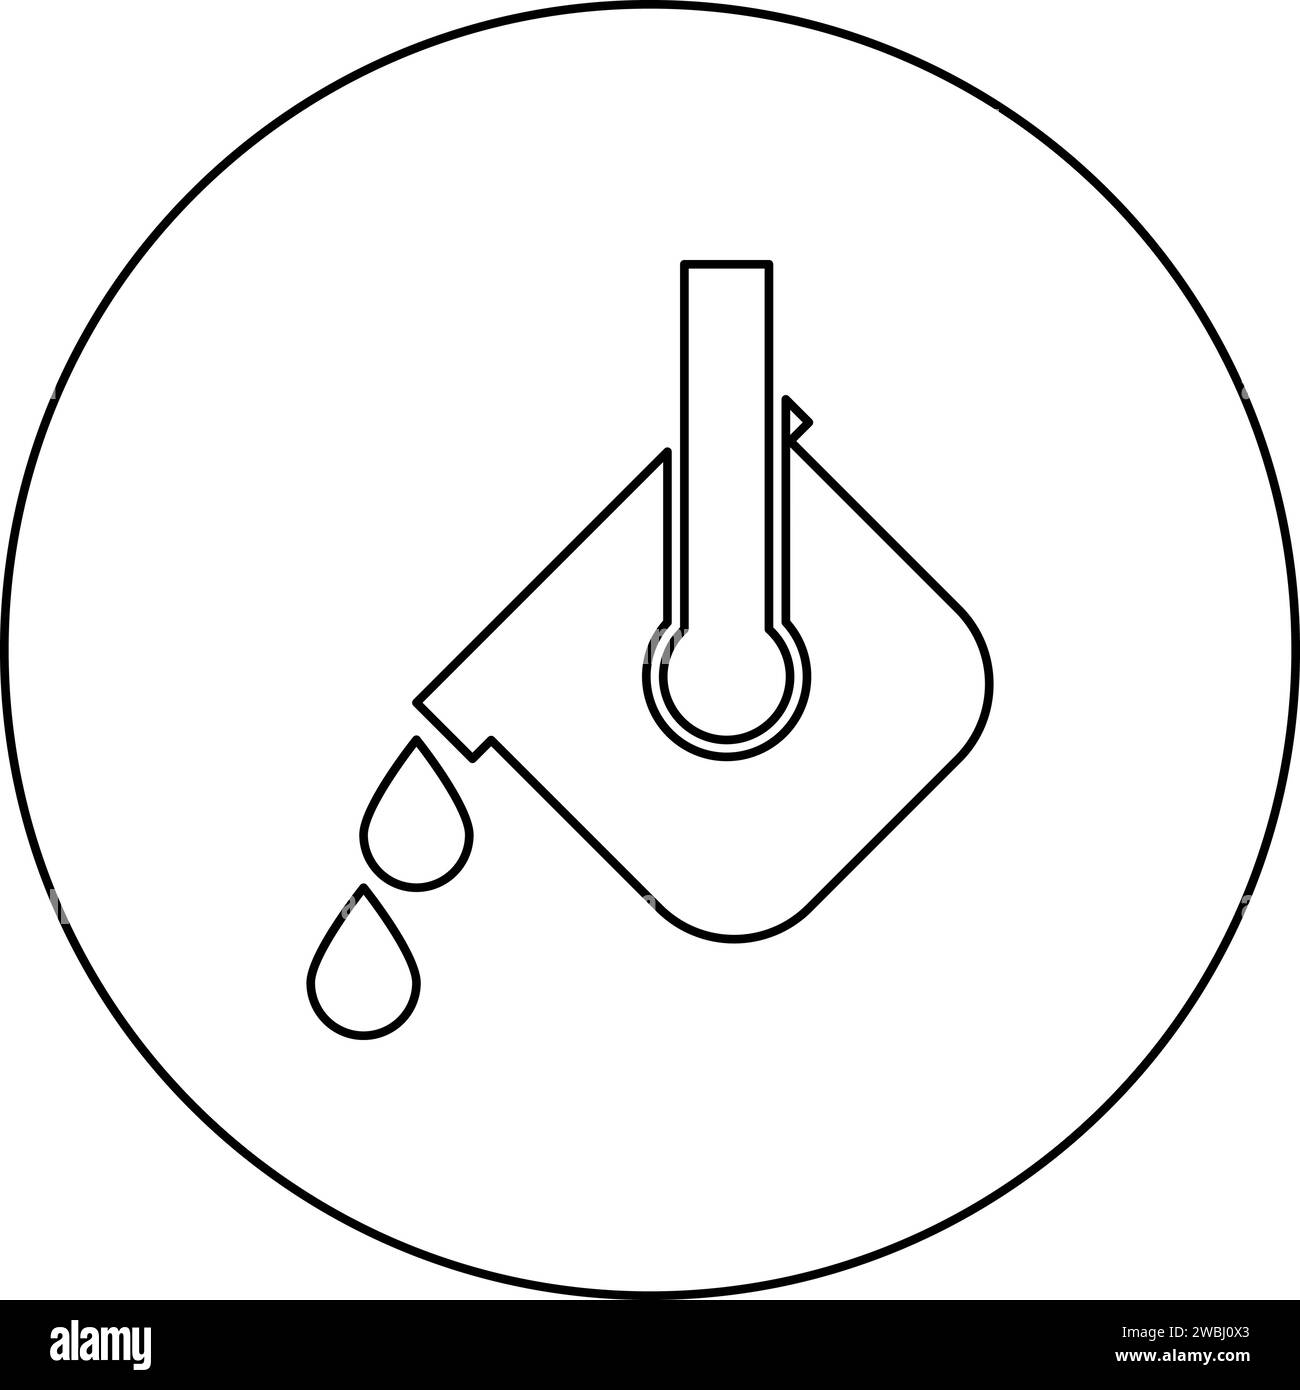 Crucible molten metal poured from ladle melting iron metallurgical foundry industry concept metal casting process icon in circle round black color Stock Vector